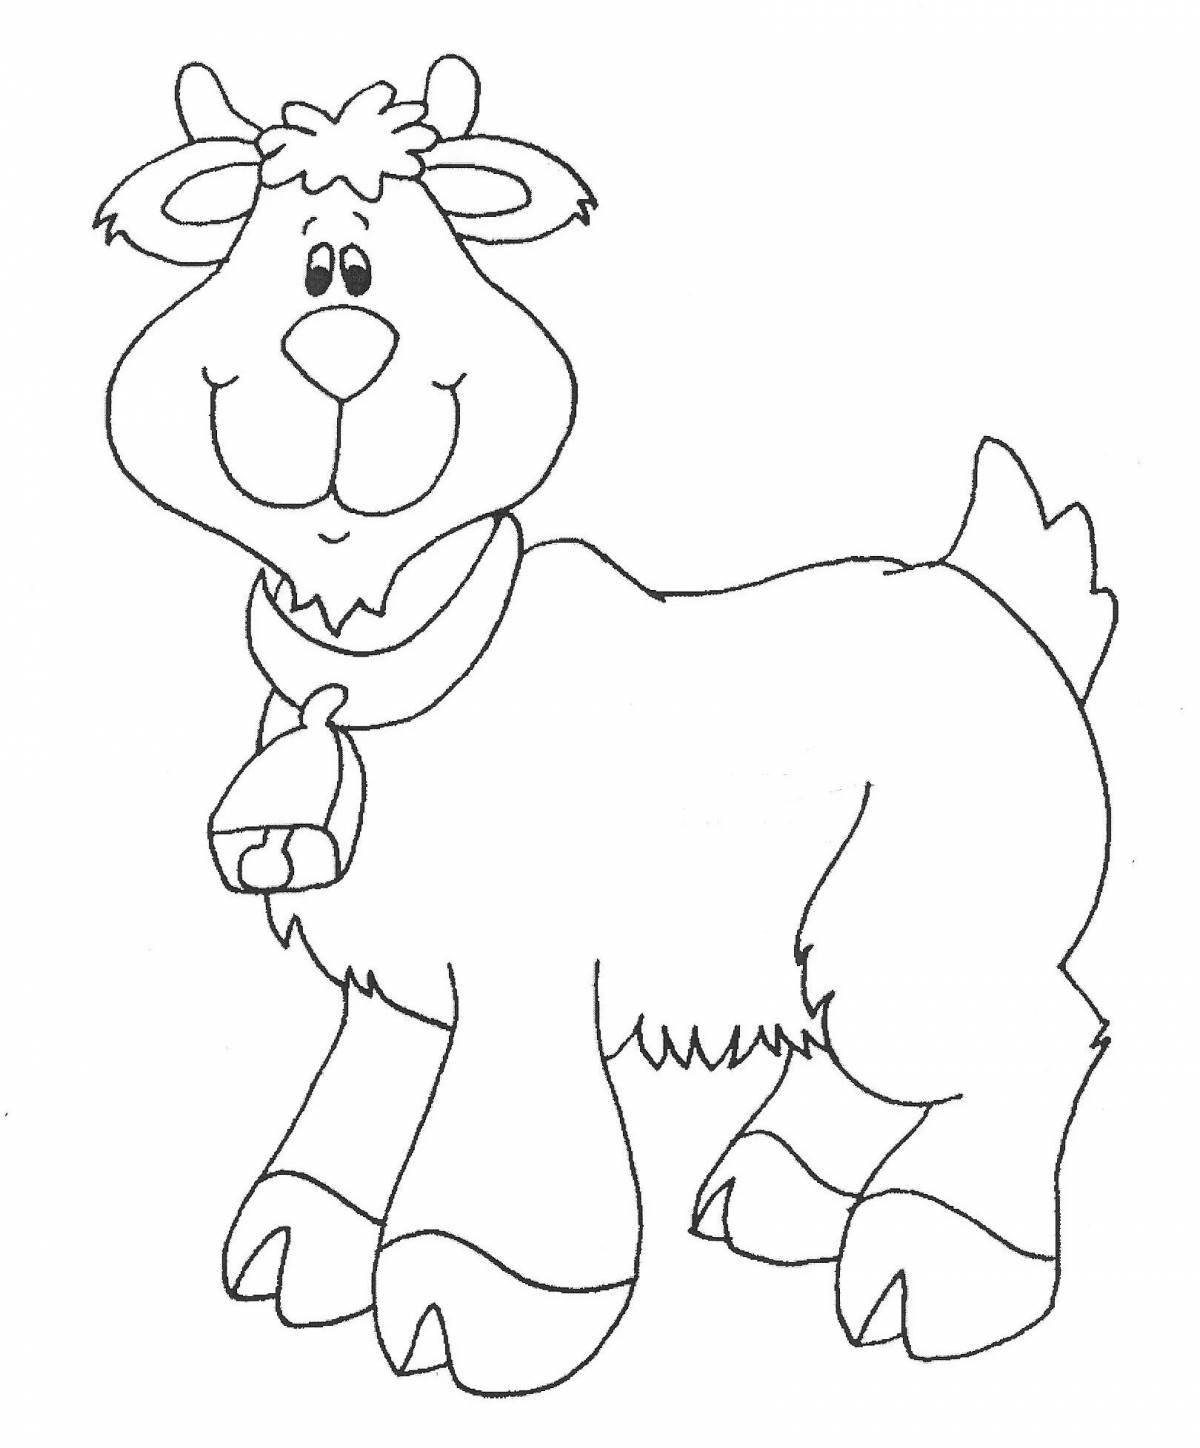 Coloring book excited goats for kids